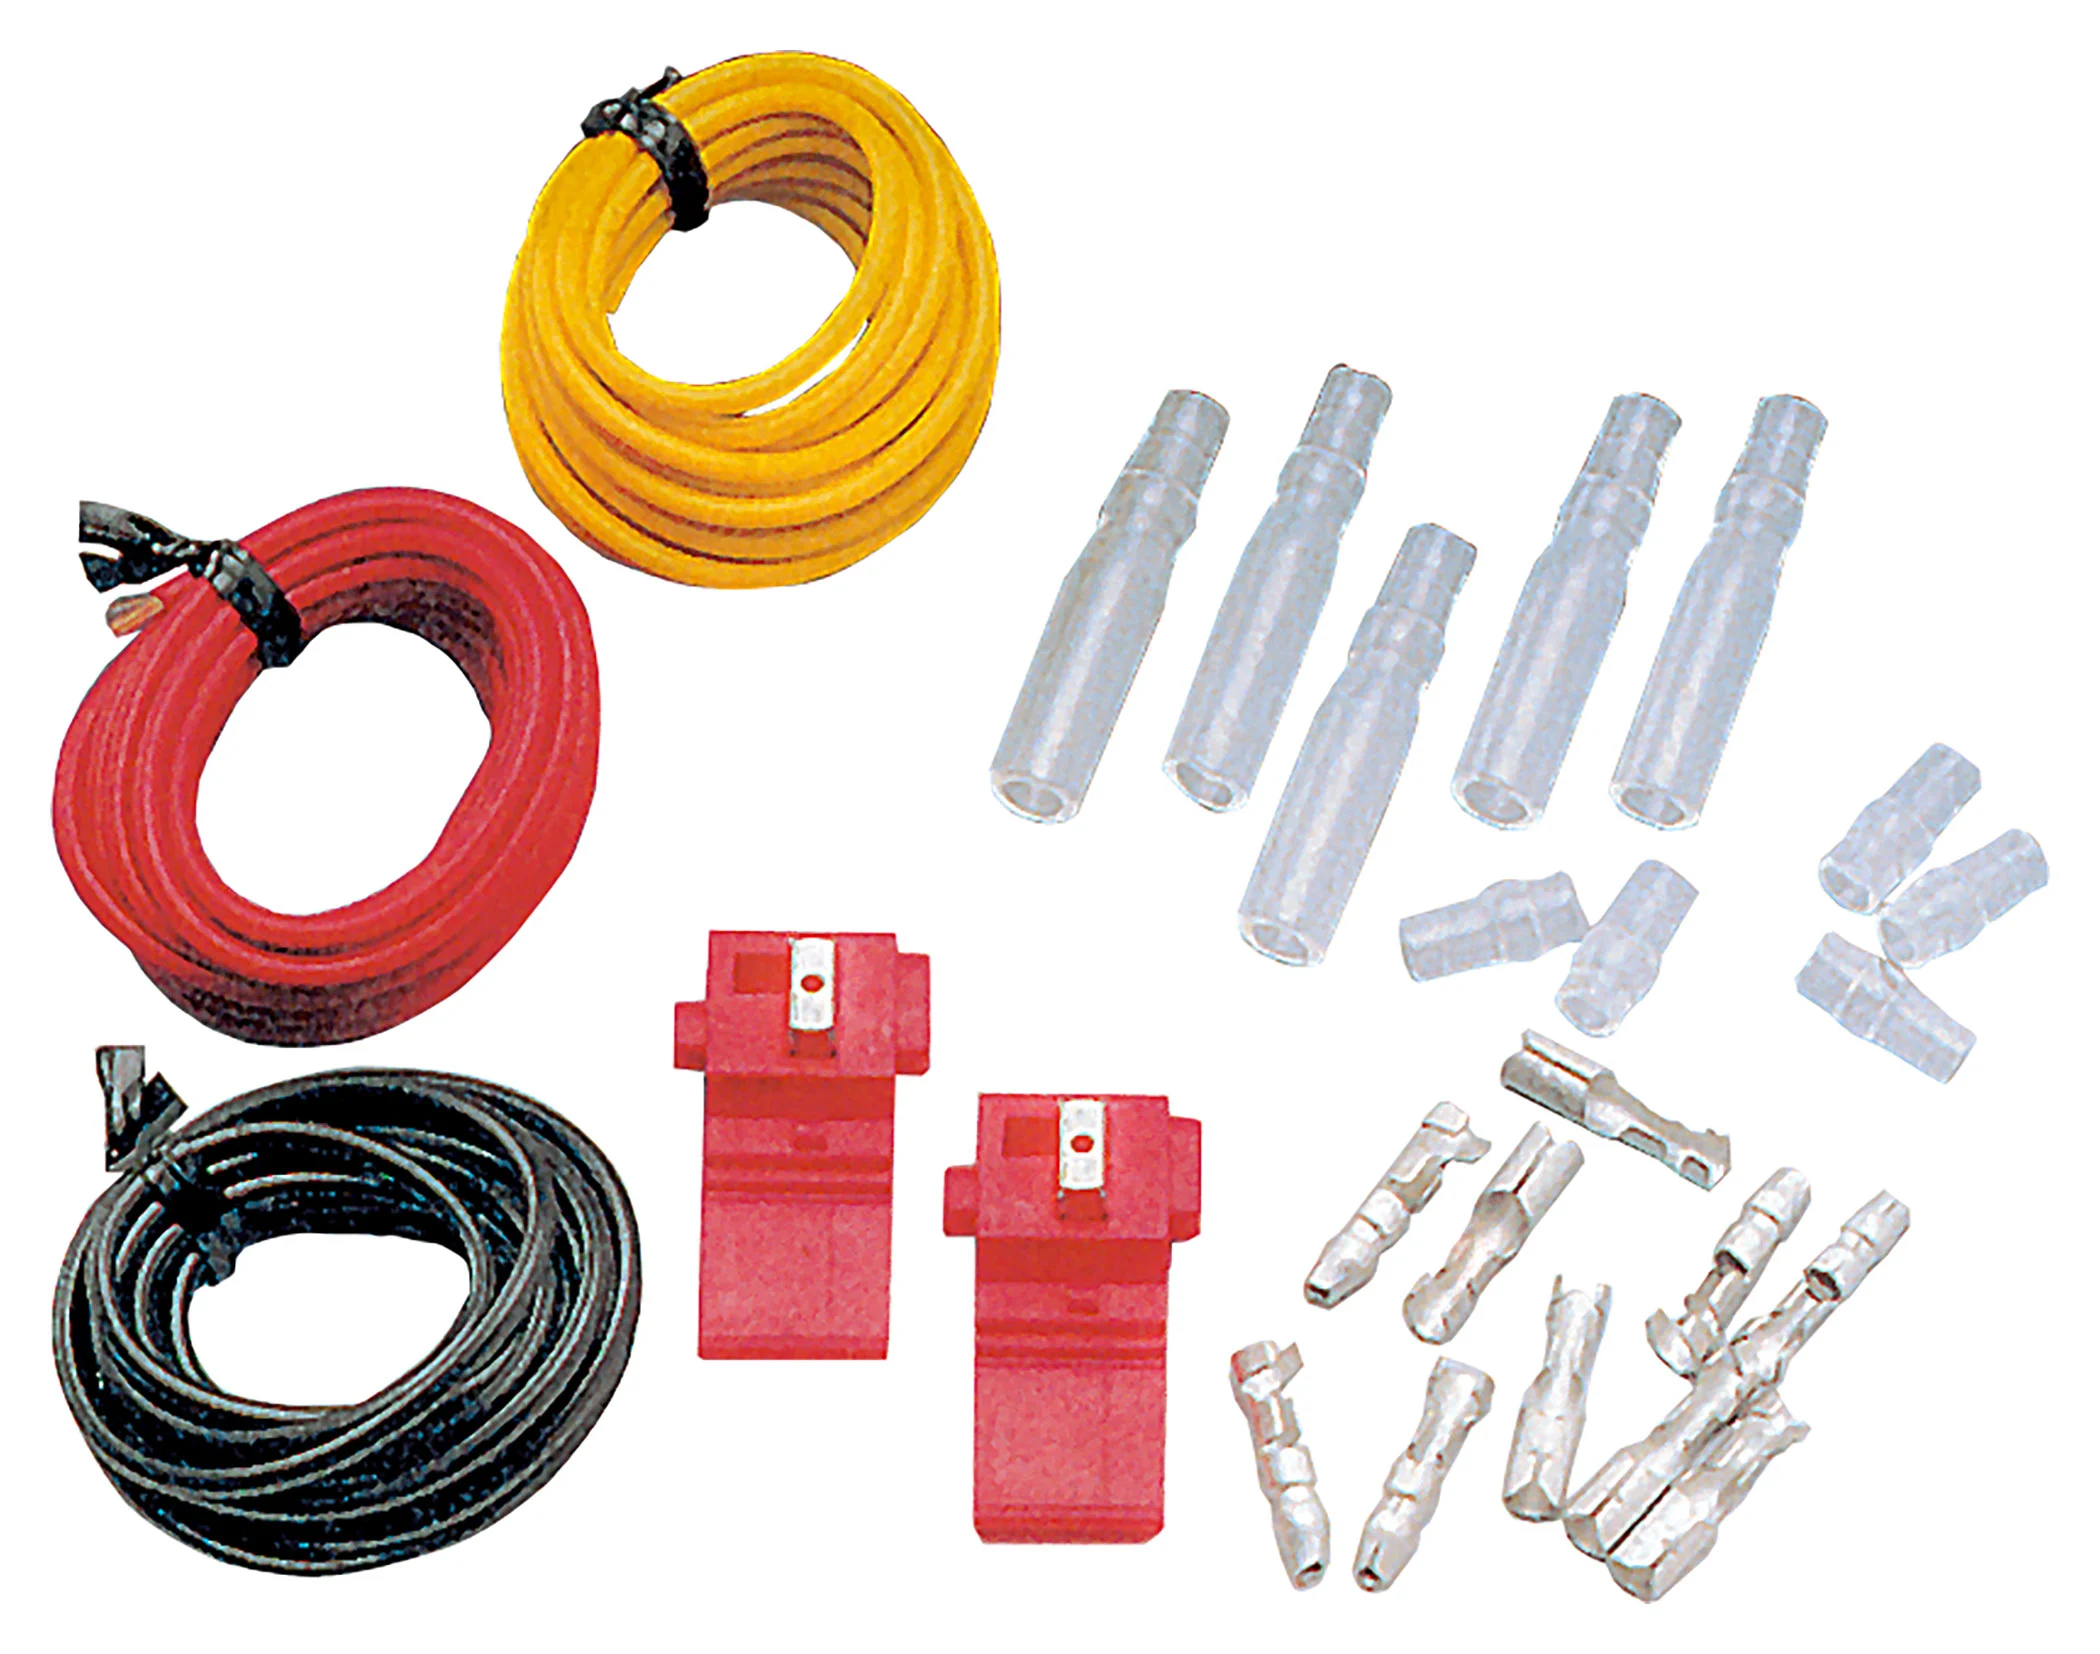 CABLE SET WITH CLAMPS